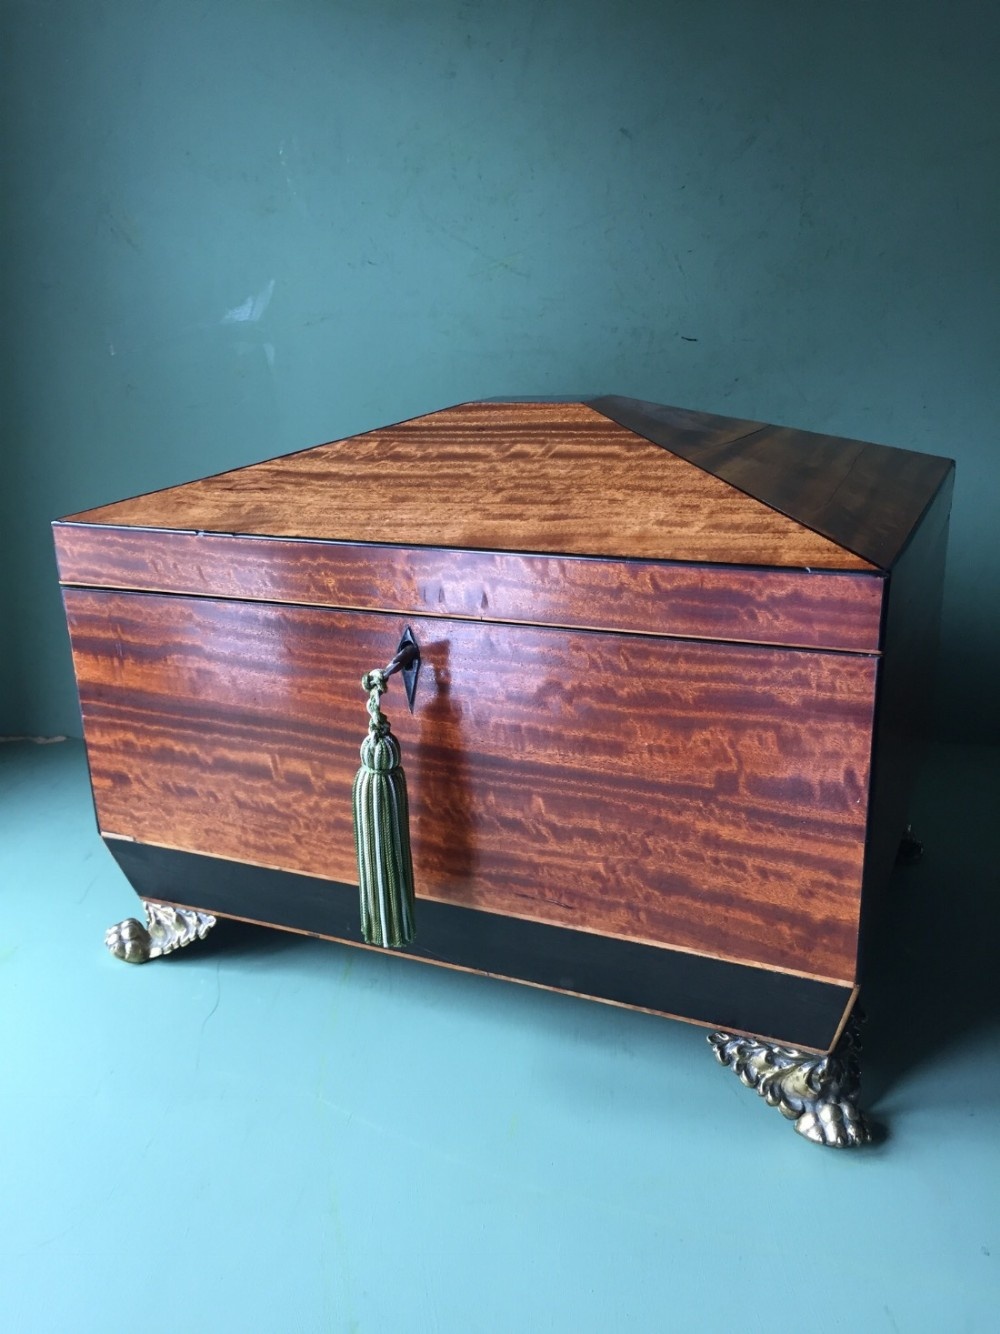 early c19th regency period satinwood and ebony sewing casket or box of sarcophagus form